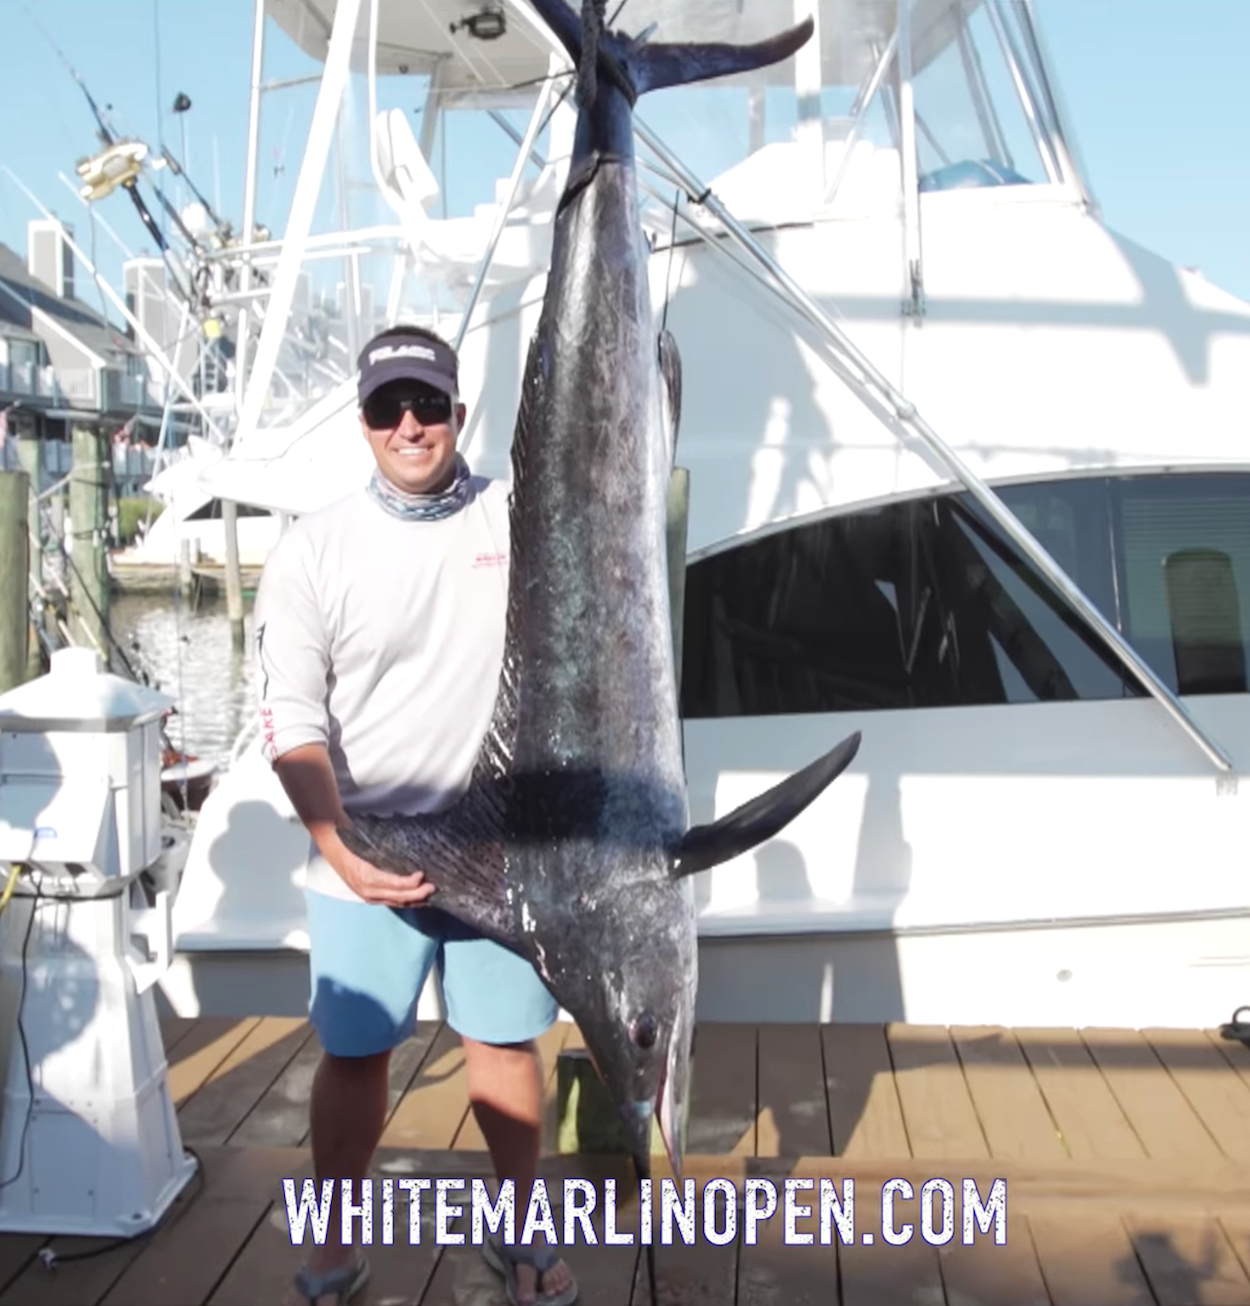 Not 1, Not 2, But 3 $Million+ Dollar Winners for the 47th Annual White Marlin Open